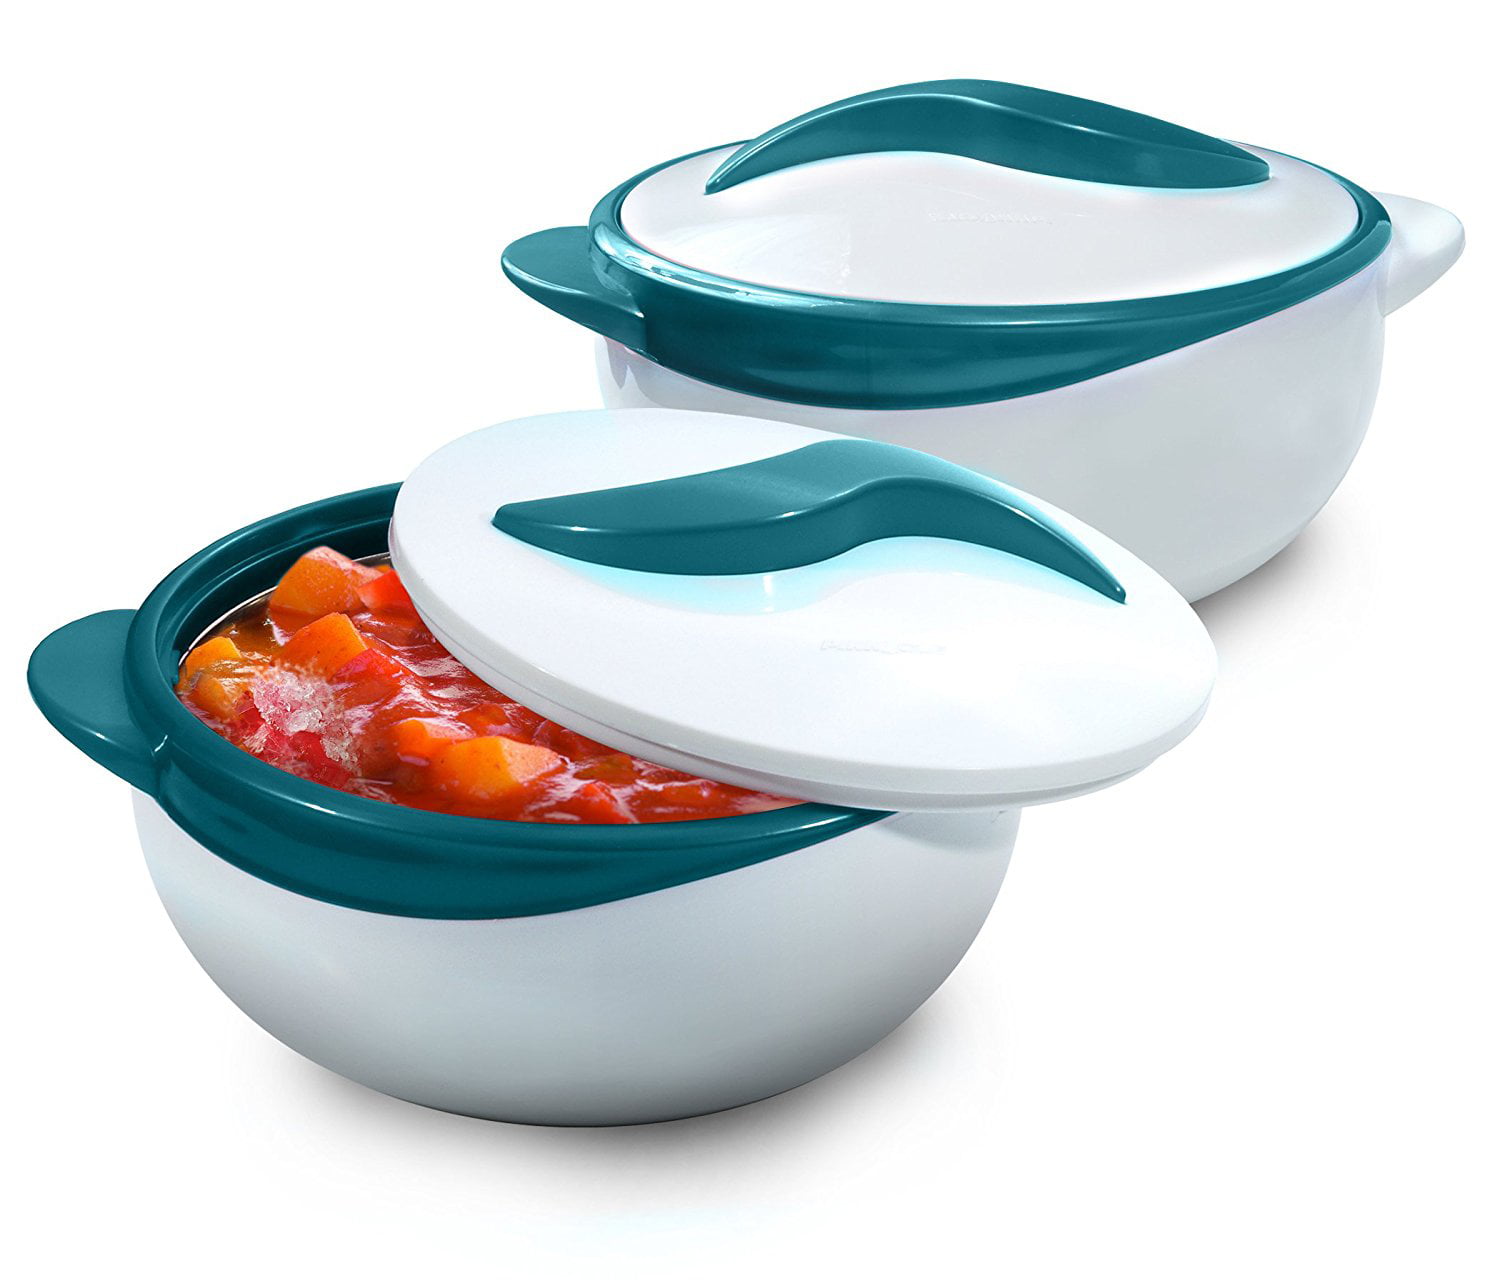 Pinnacle Serving Salad/ Soup Dish Bowl - Thermal Insulated Bowl with